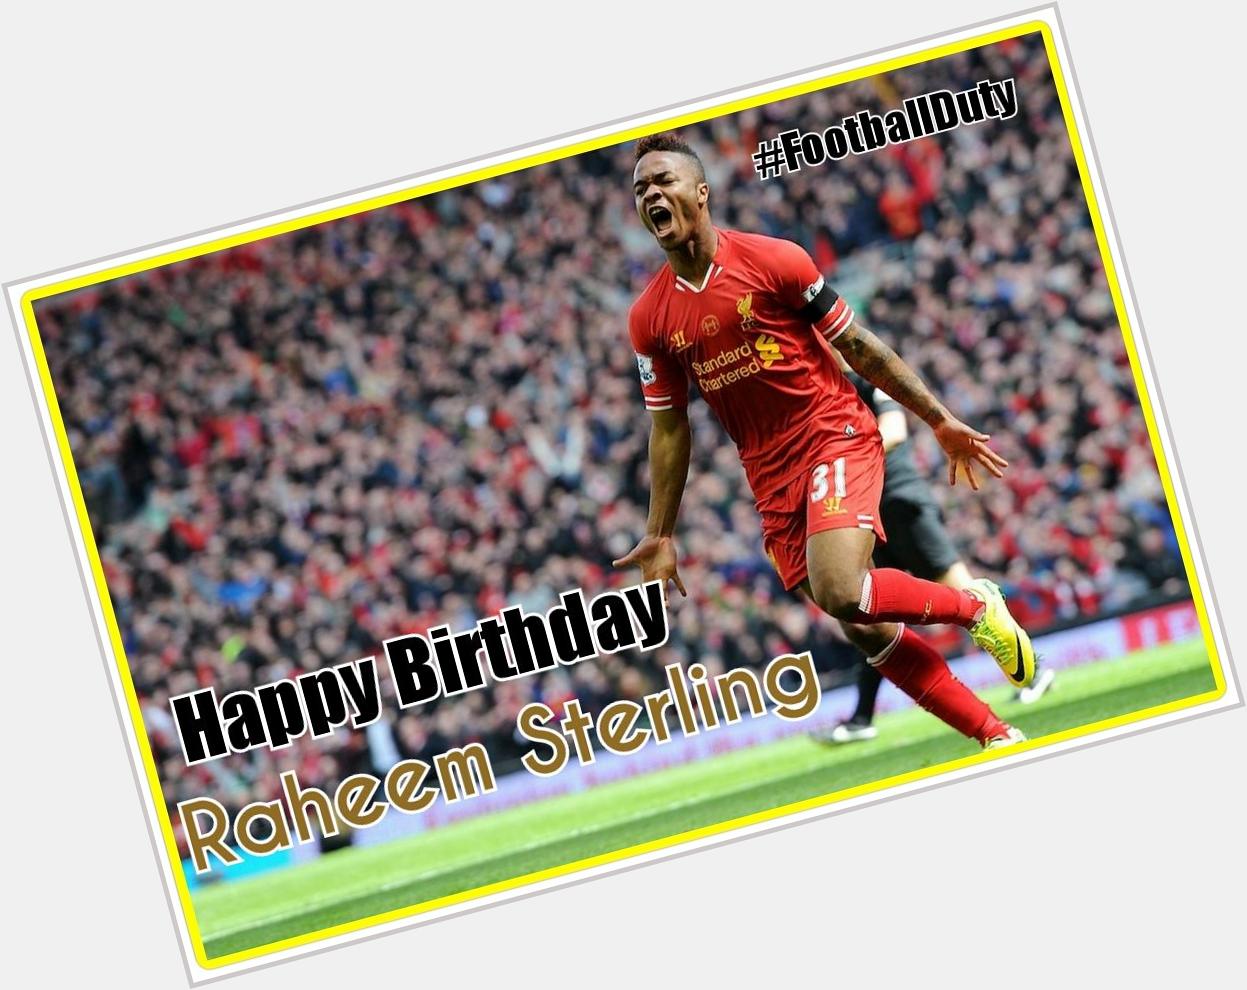 Happy Birthday Raheem Sterling!
The Liverpool youngster turns 20 today! 